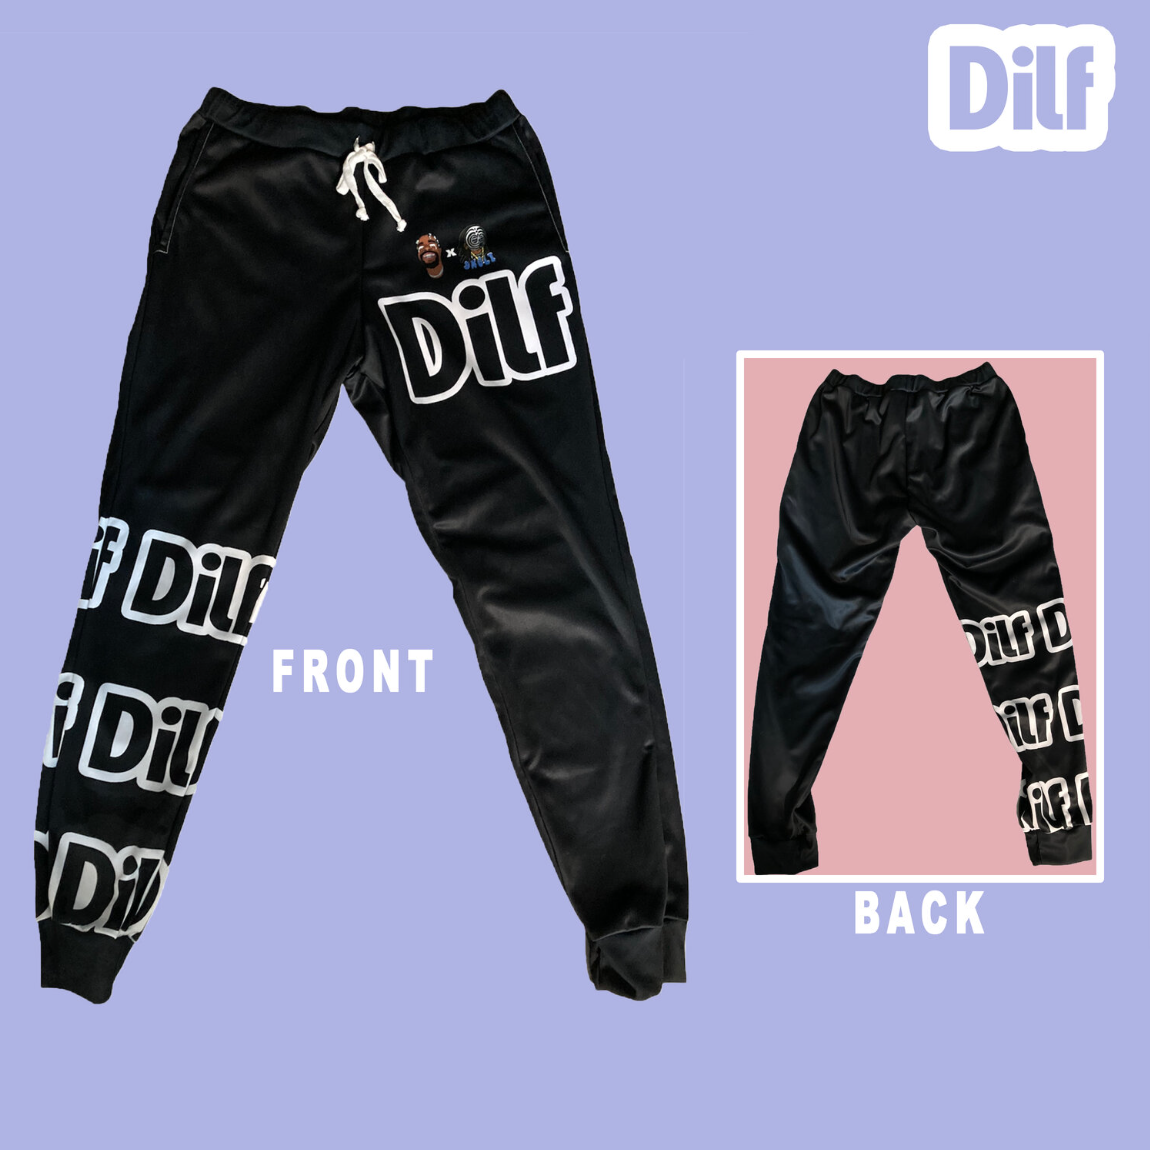 DILF JOGGERS - $60 (COMES IN ALL COLORS)